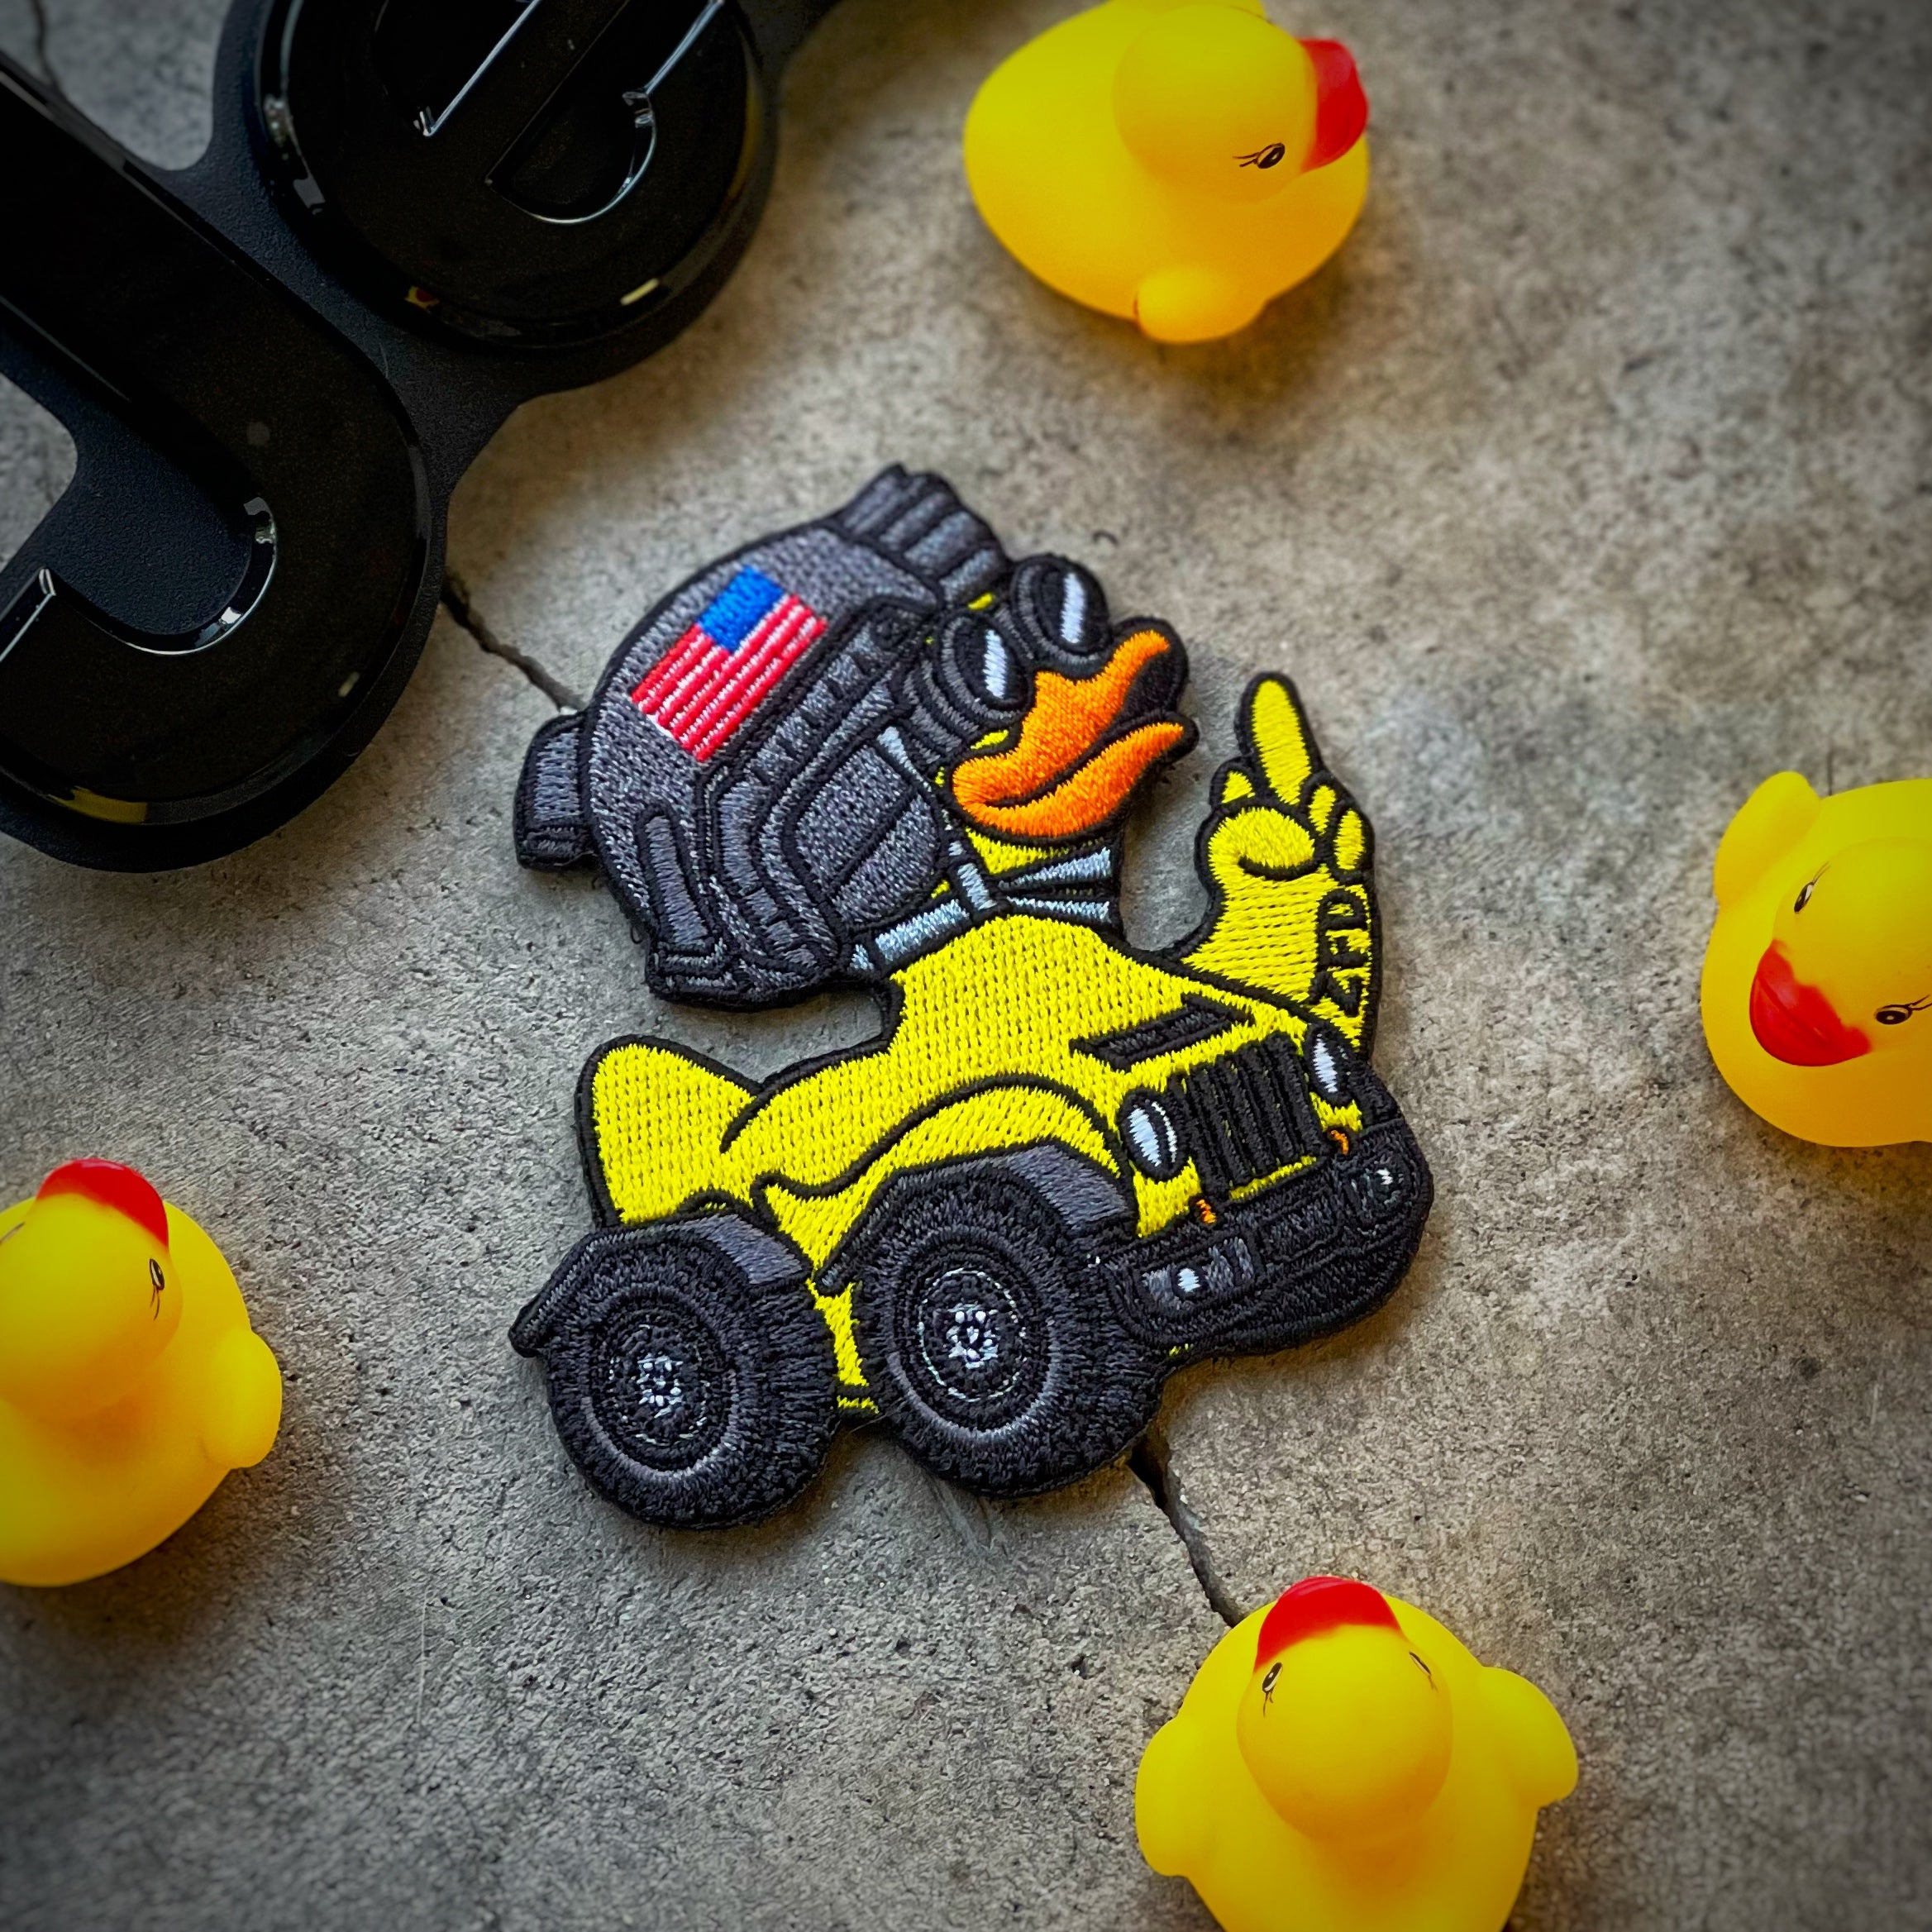 Jeep Yellow Rubber Duck wearing Tactical helmet with goggles 